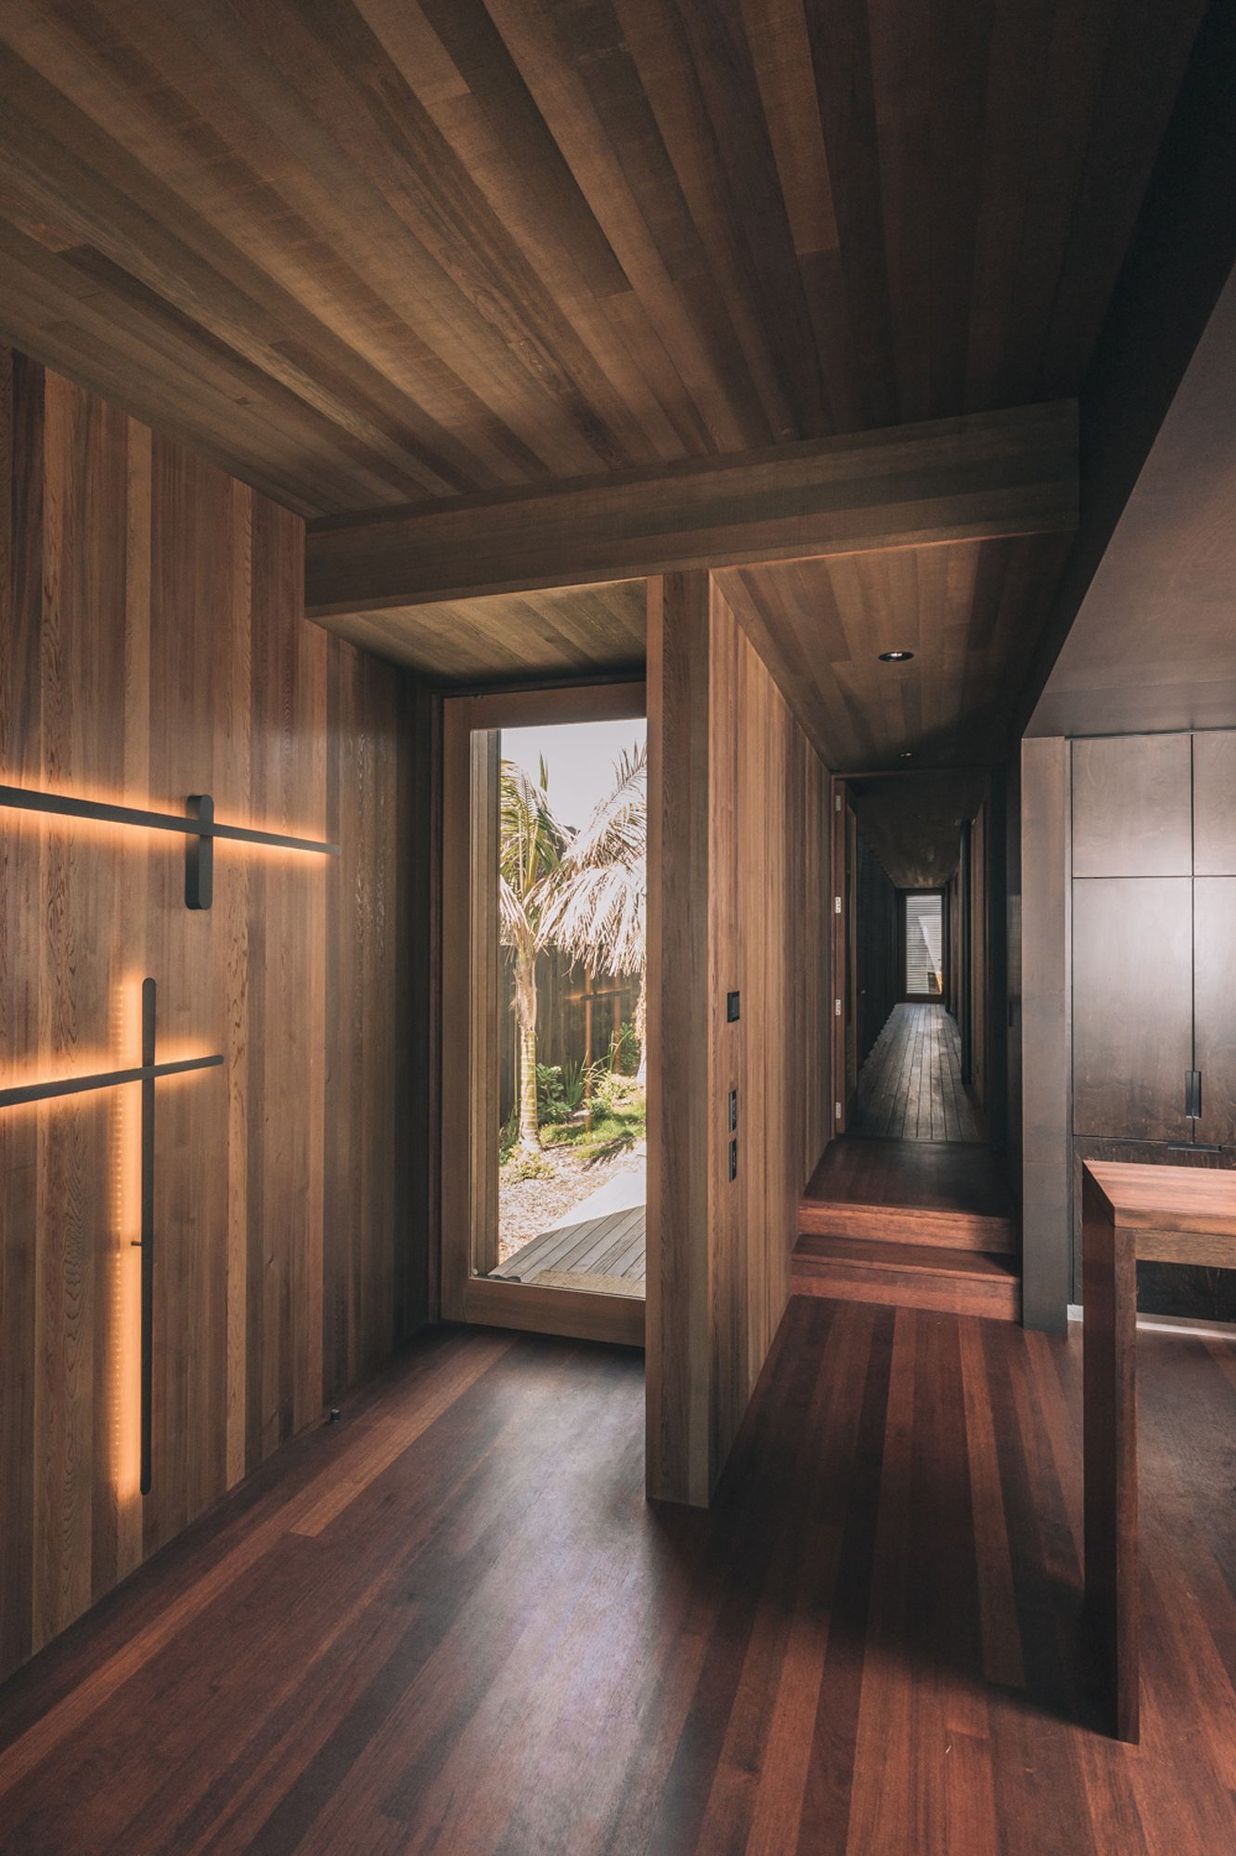 The interiors are dominanted by rich timber and deep tones, unusual for beachside homes.